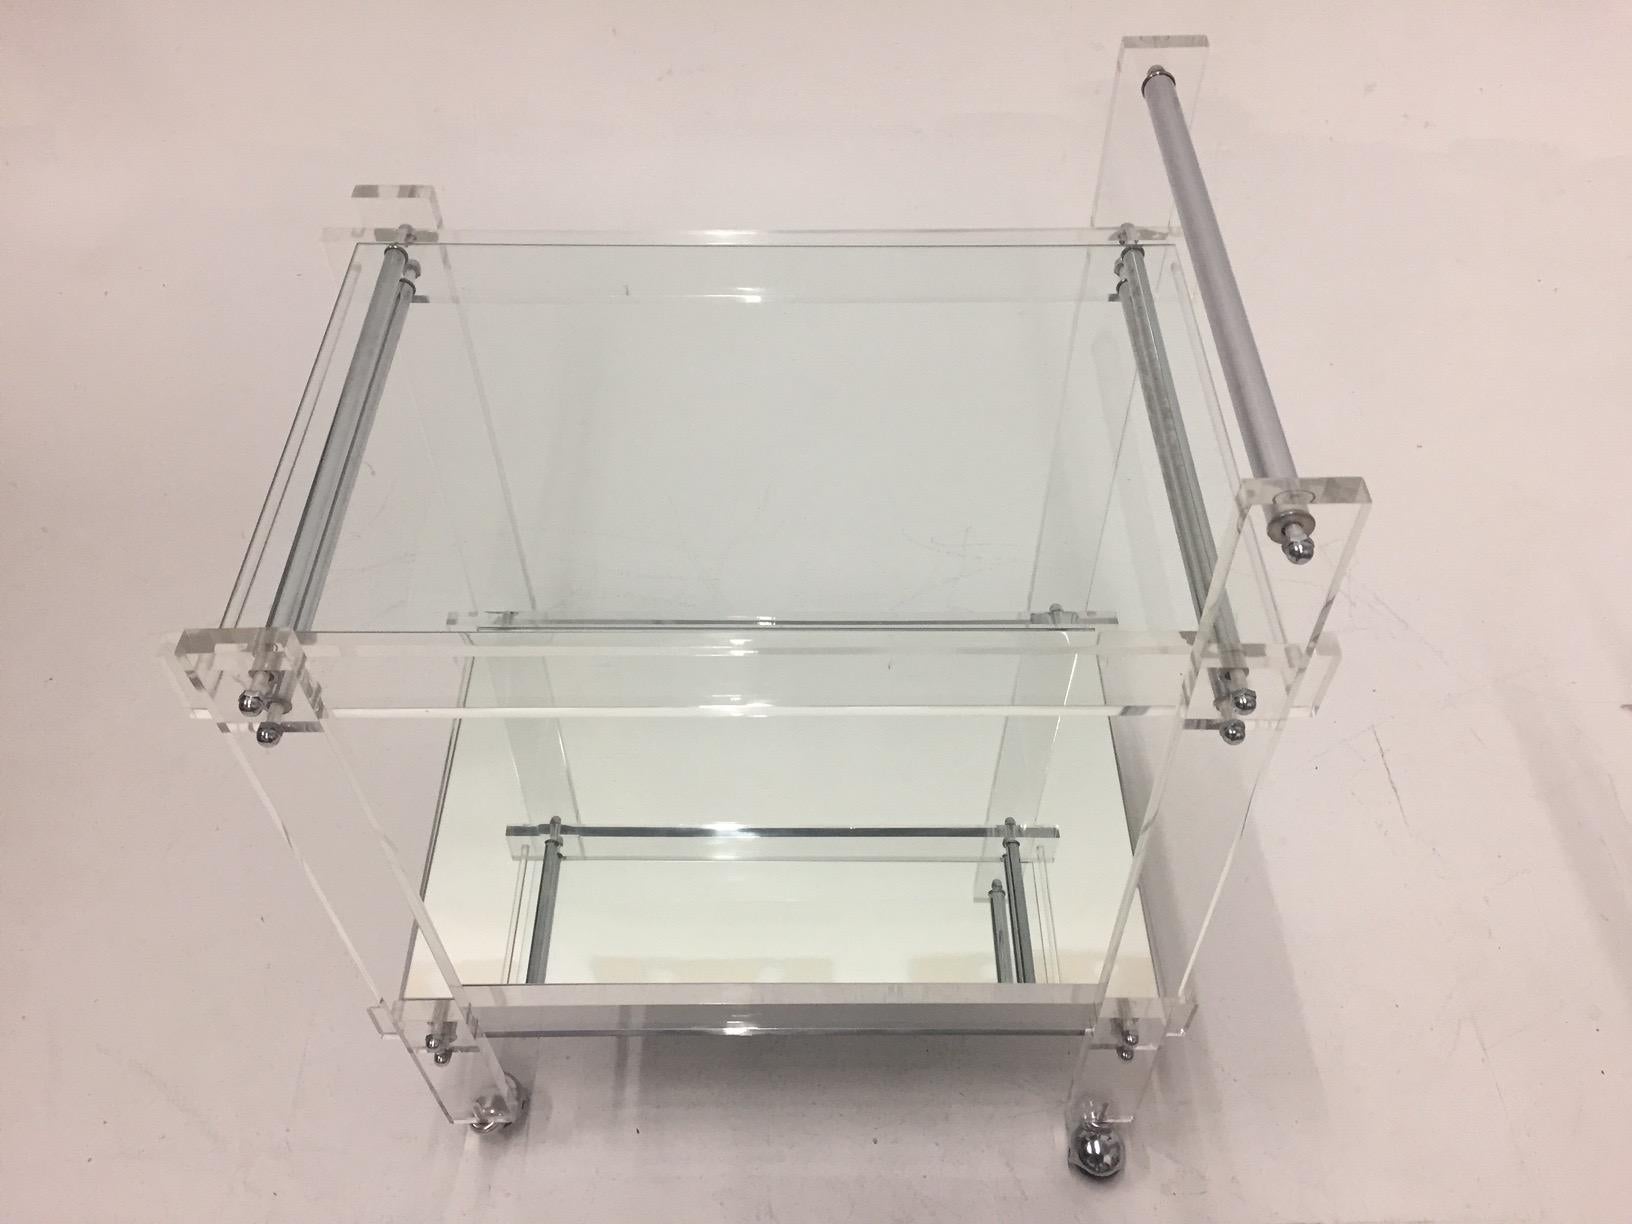 A glamorous vintage Lucite and chrome Mid-Century Modern bar cart having clear glass top tier and mirrored bottom shelf, easily rolled on chrome capped casters.
bottom shelf 11